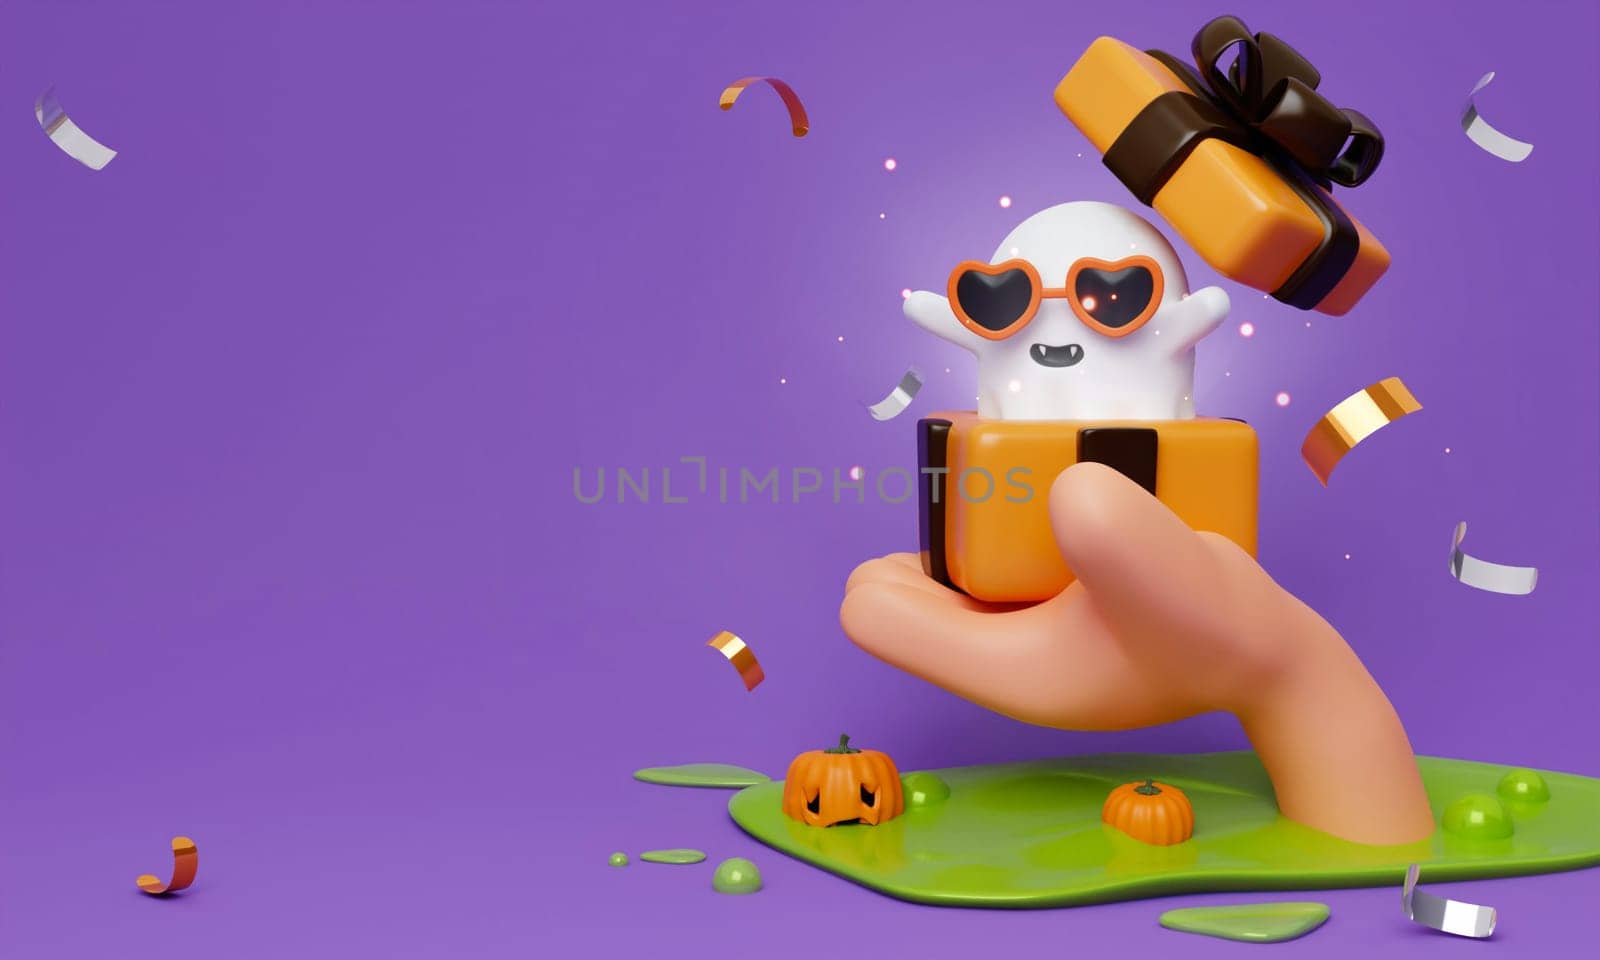 Happy Halloween Festiv. hand hold ghost emerges from a gift box with balloon and pumpkin on purple background. Holiday Hallows' Eve or Saints' Eve. copy space. 3d render..